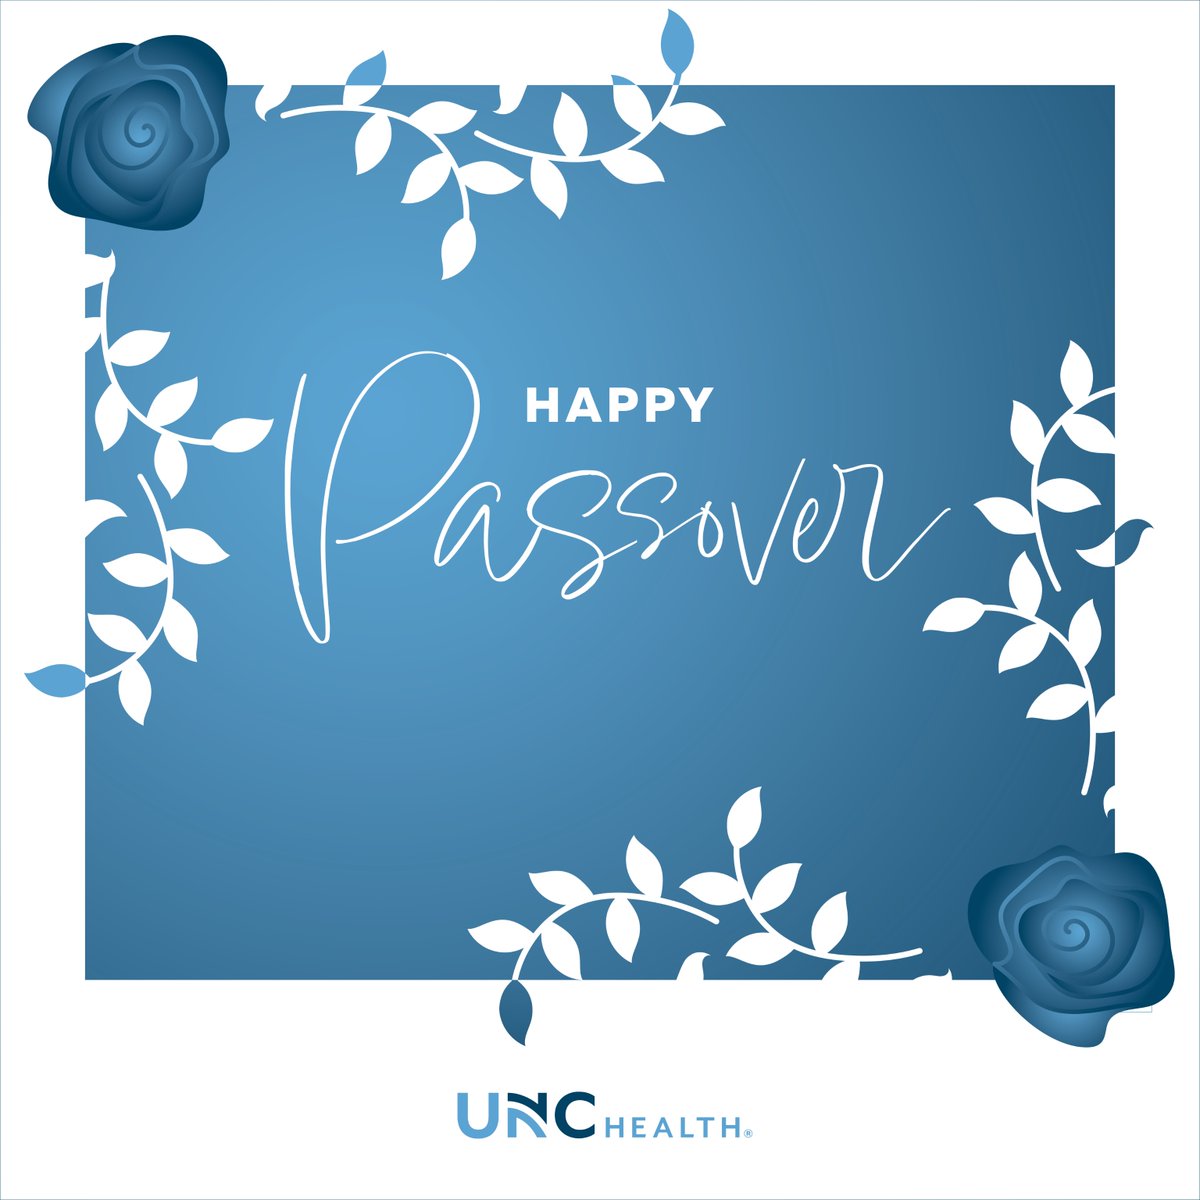 Happy Passover to all who celebrate! #OneGreatTeam